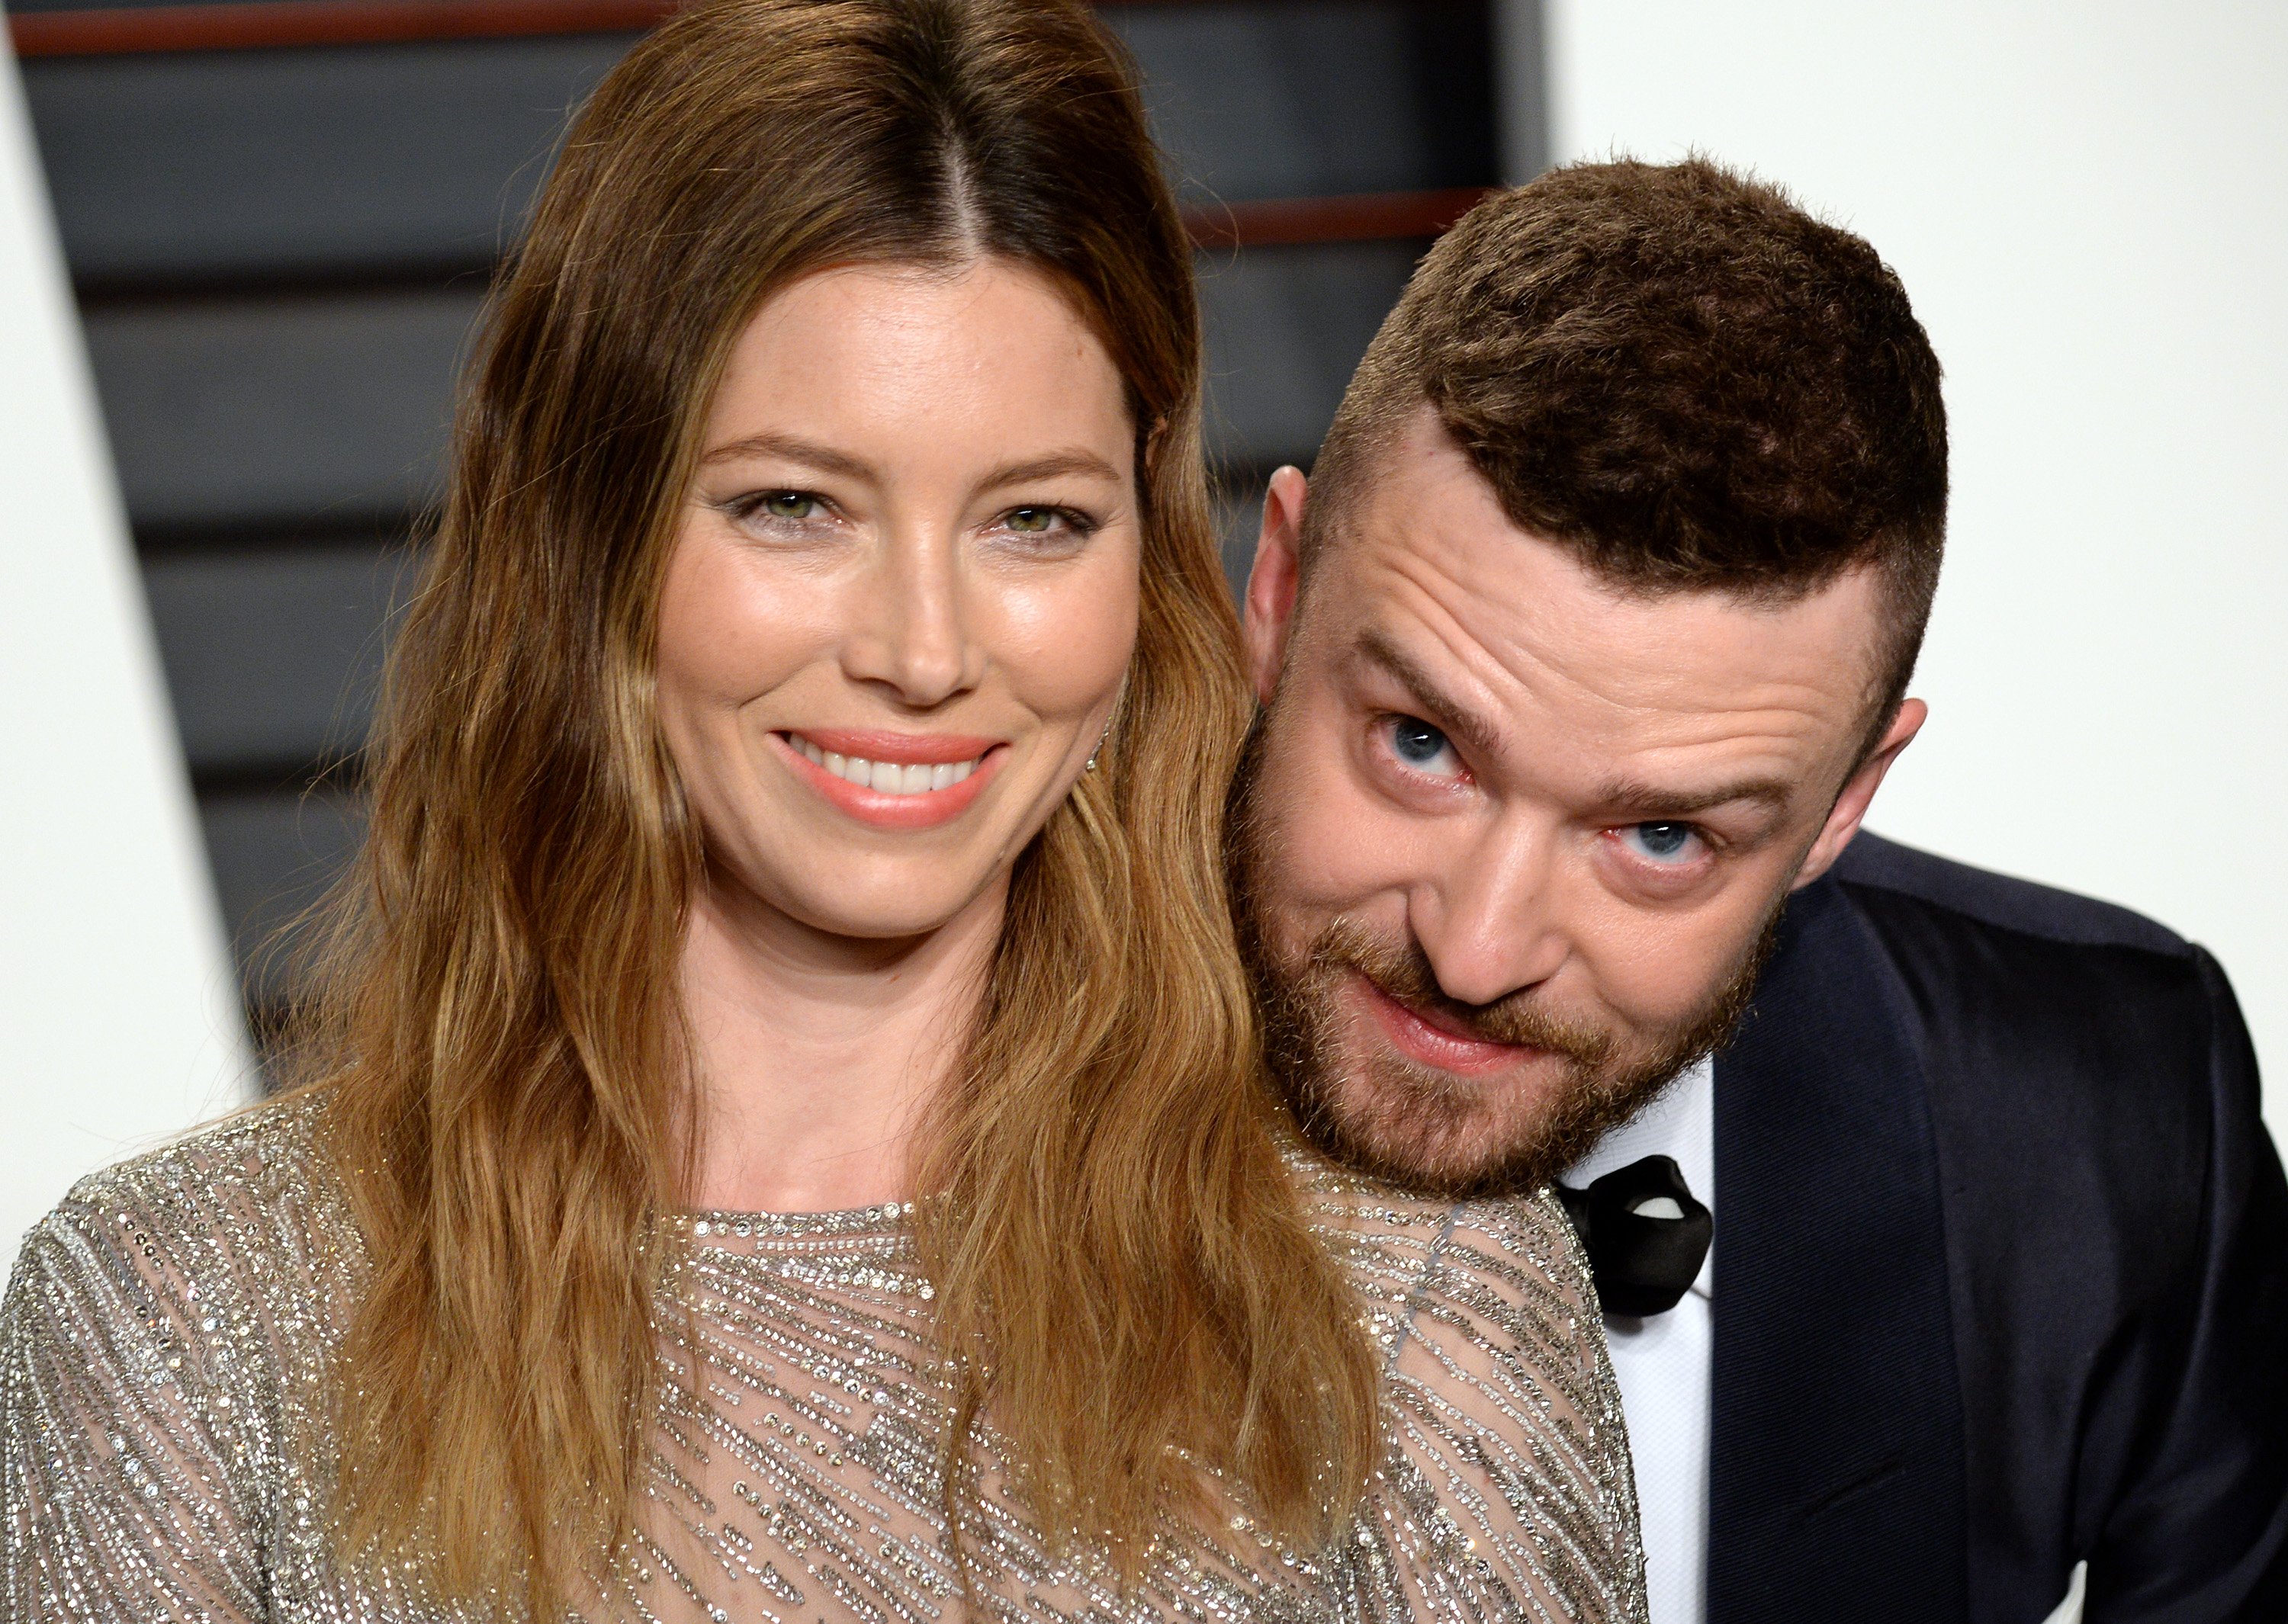 Jessica Biel and Justin Timberlake attend the 2016 Vanity Fair Oscar Party on February 28, 2016, in Beverly Hills, California. | Source: Getty Images